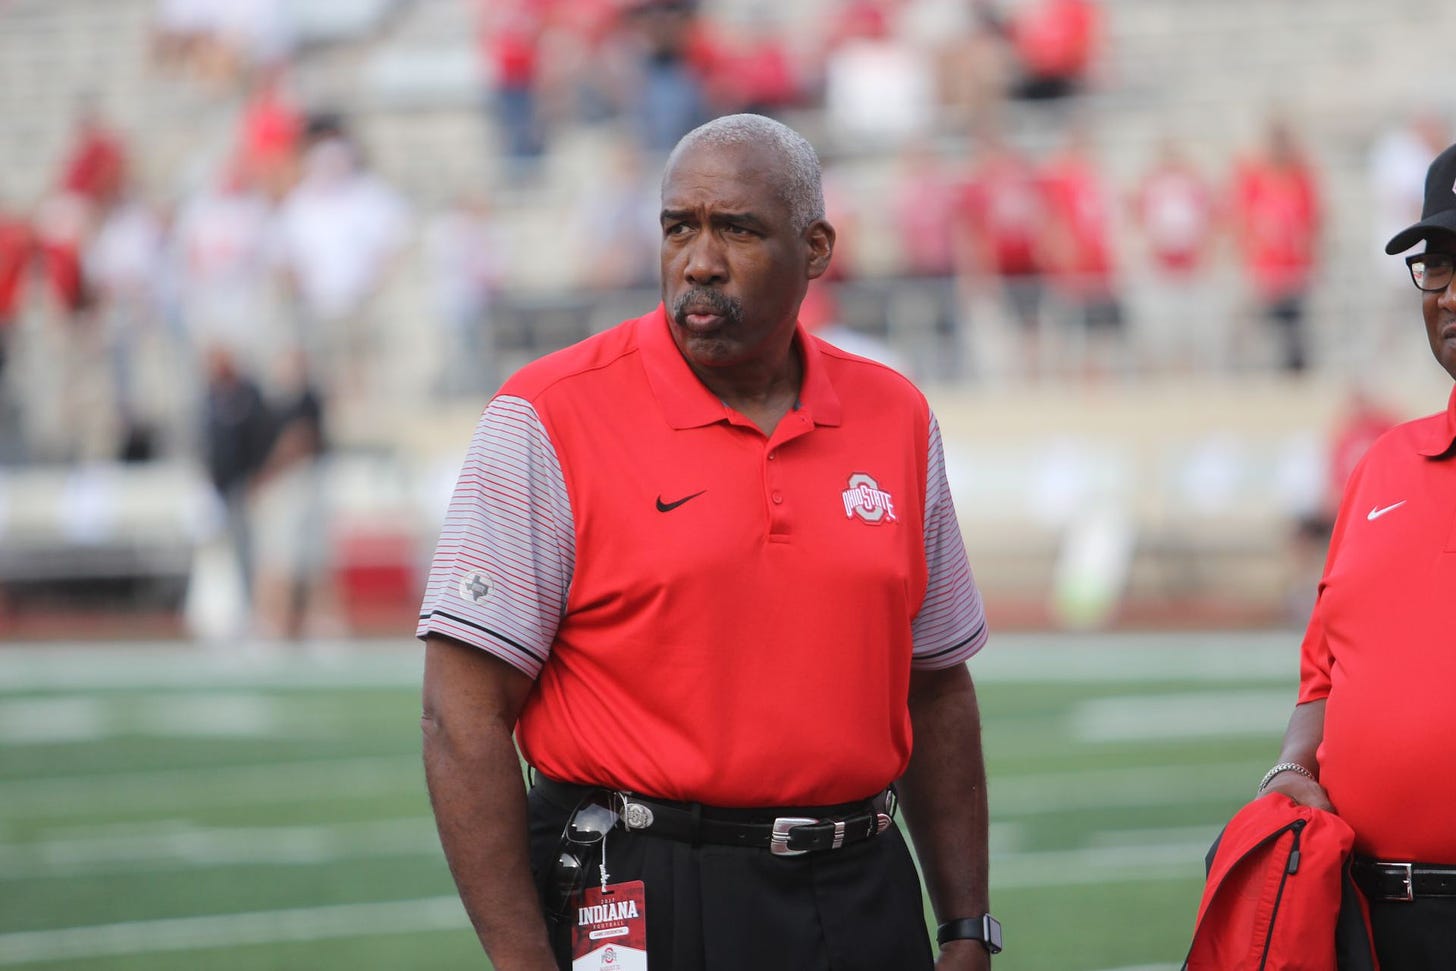 Gene Smith speaks on dangers of student-athlete payment – The Lantern